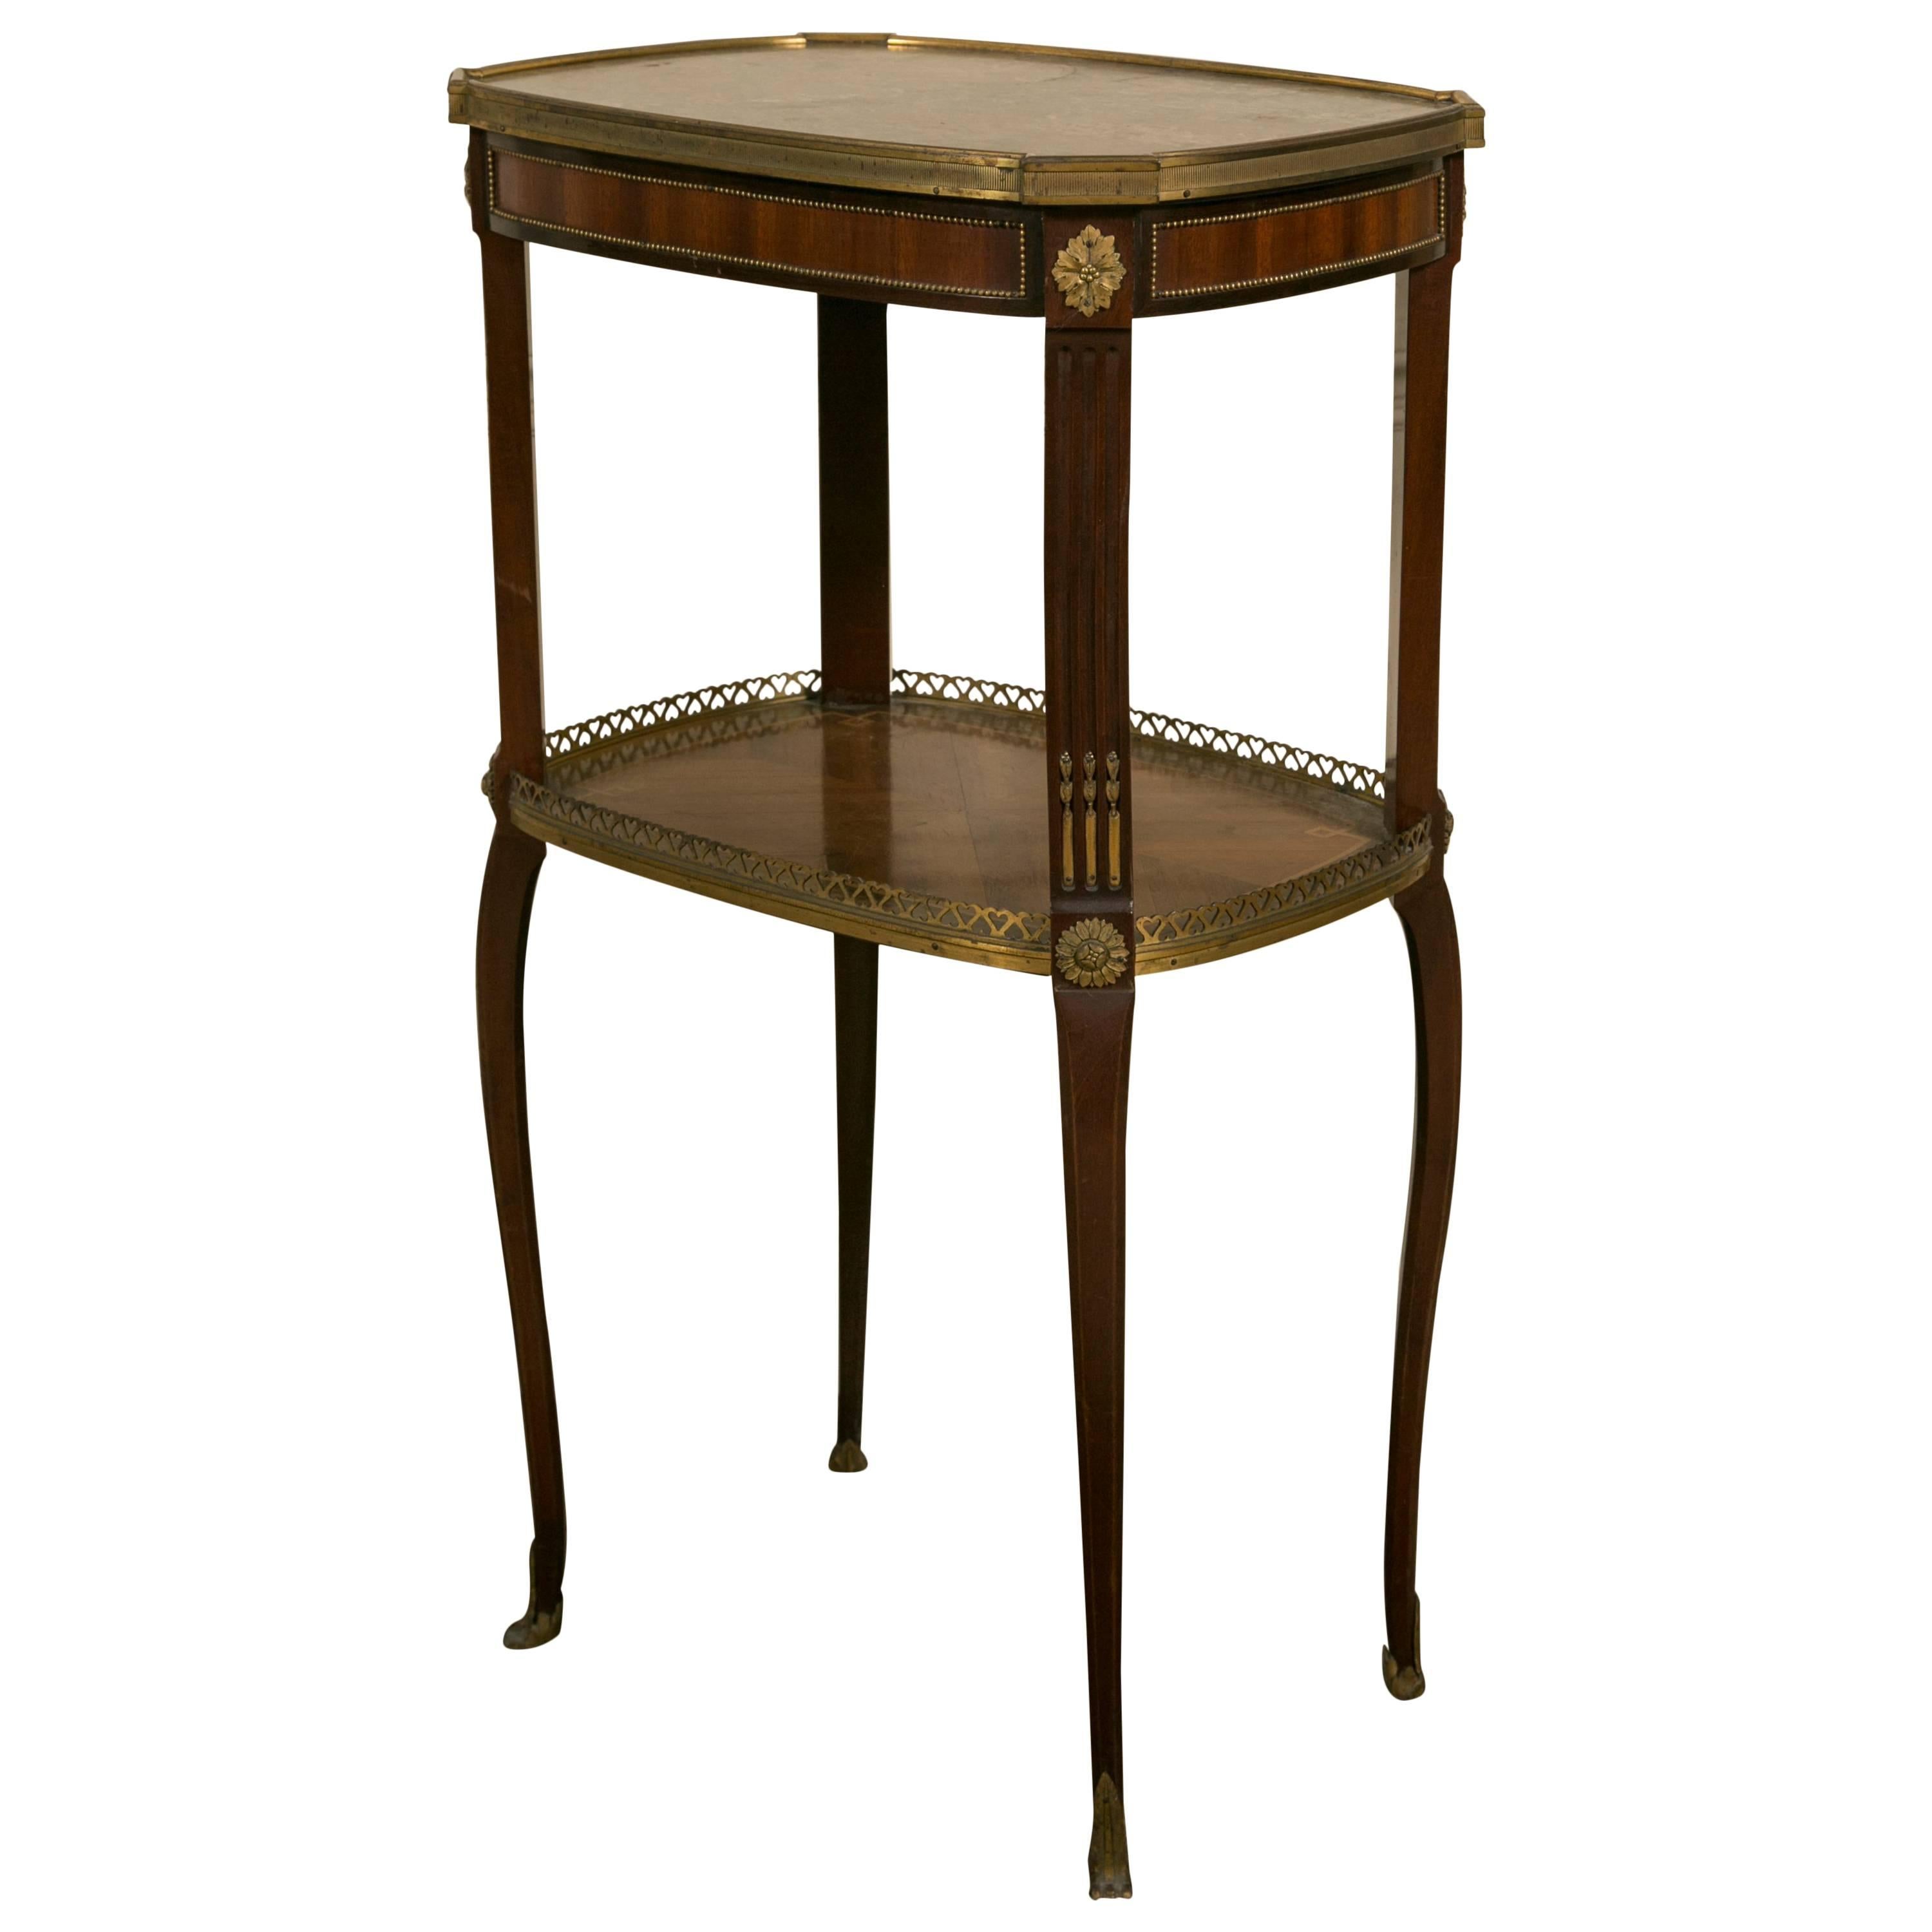 19th Century LXV Style Mahogany Satinwood, Gilt Bronze and Marble Top Side Table For Sale